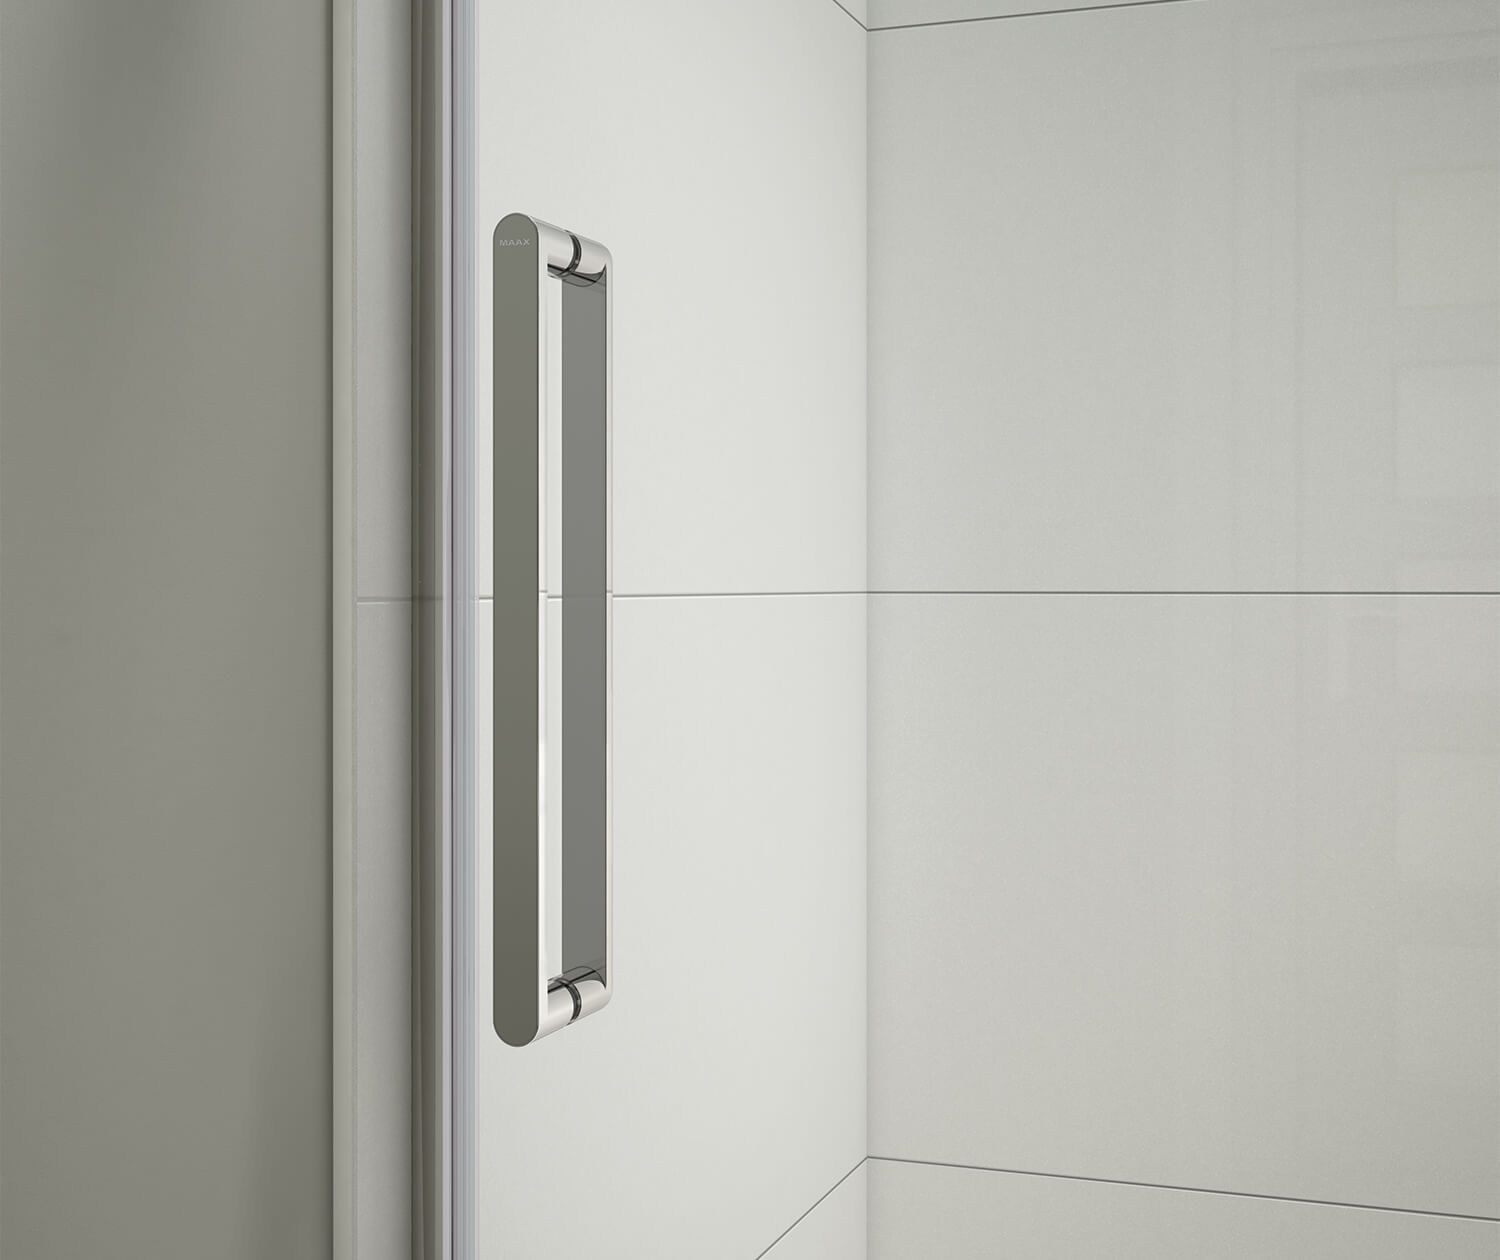 Halo Pro 44 ½-47 x 78 ¾ in. 8mm Sliding Shower Door for Alcove Installation  with Clear glass in Chrome | Shower Door